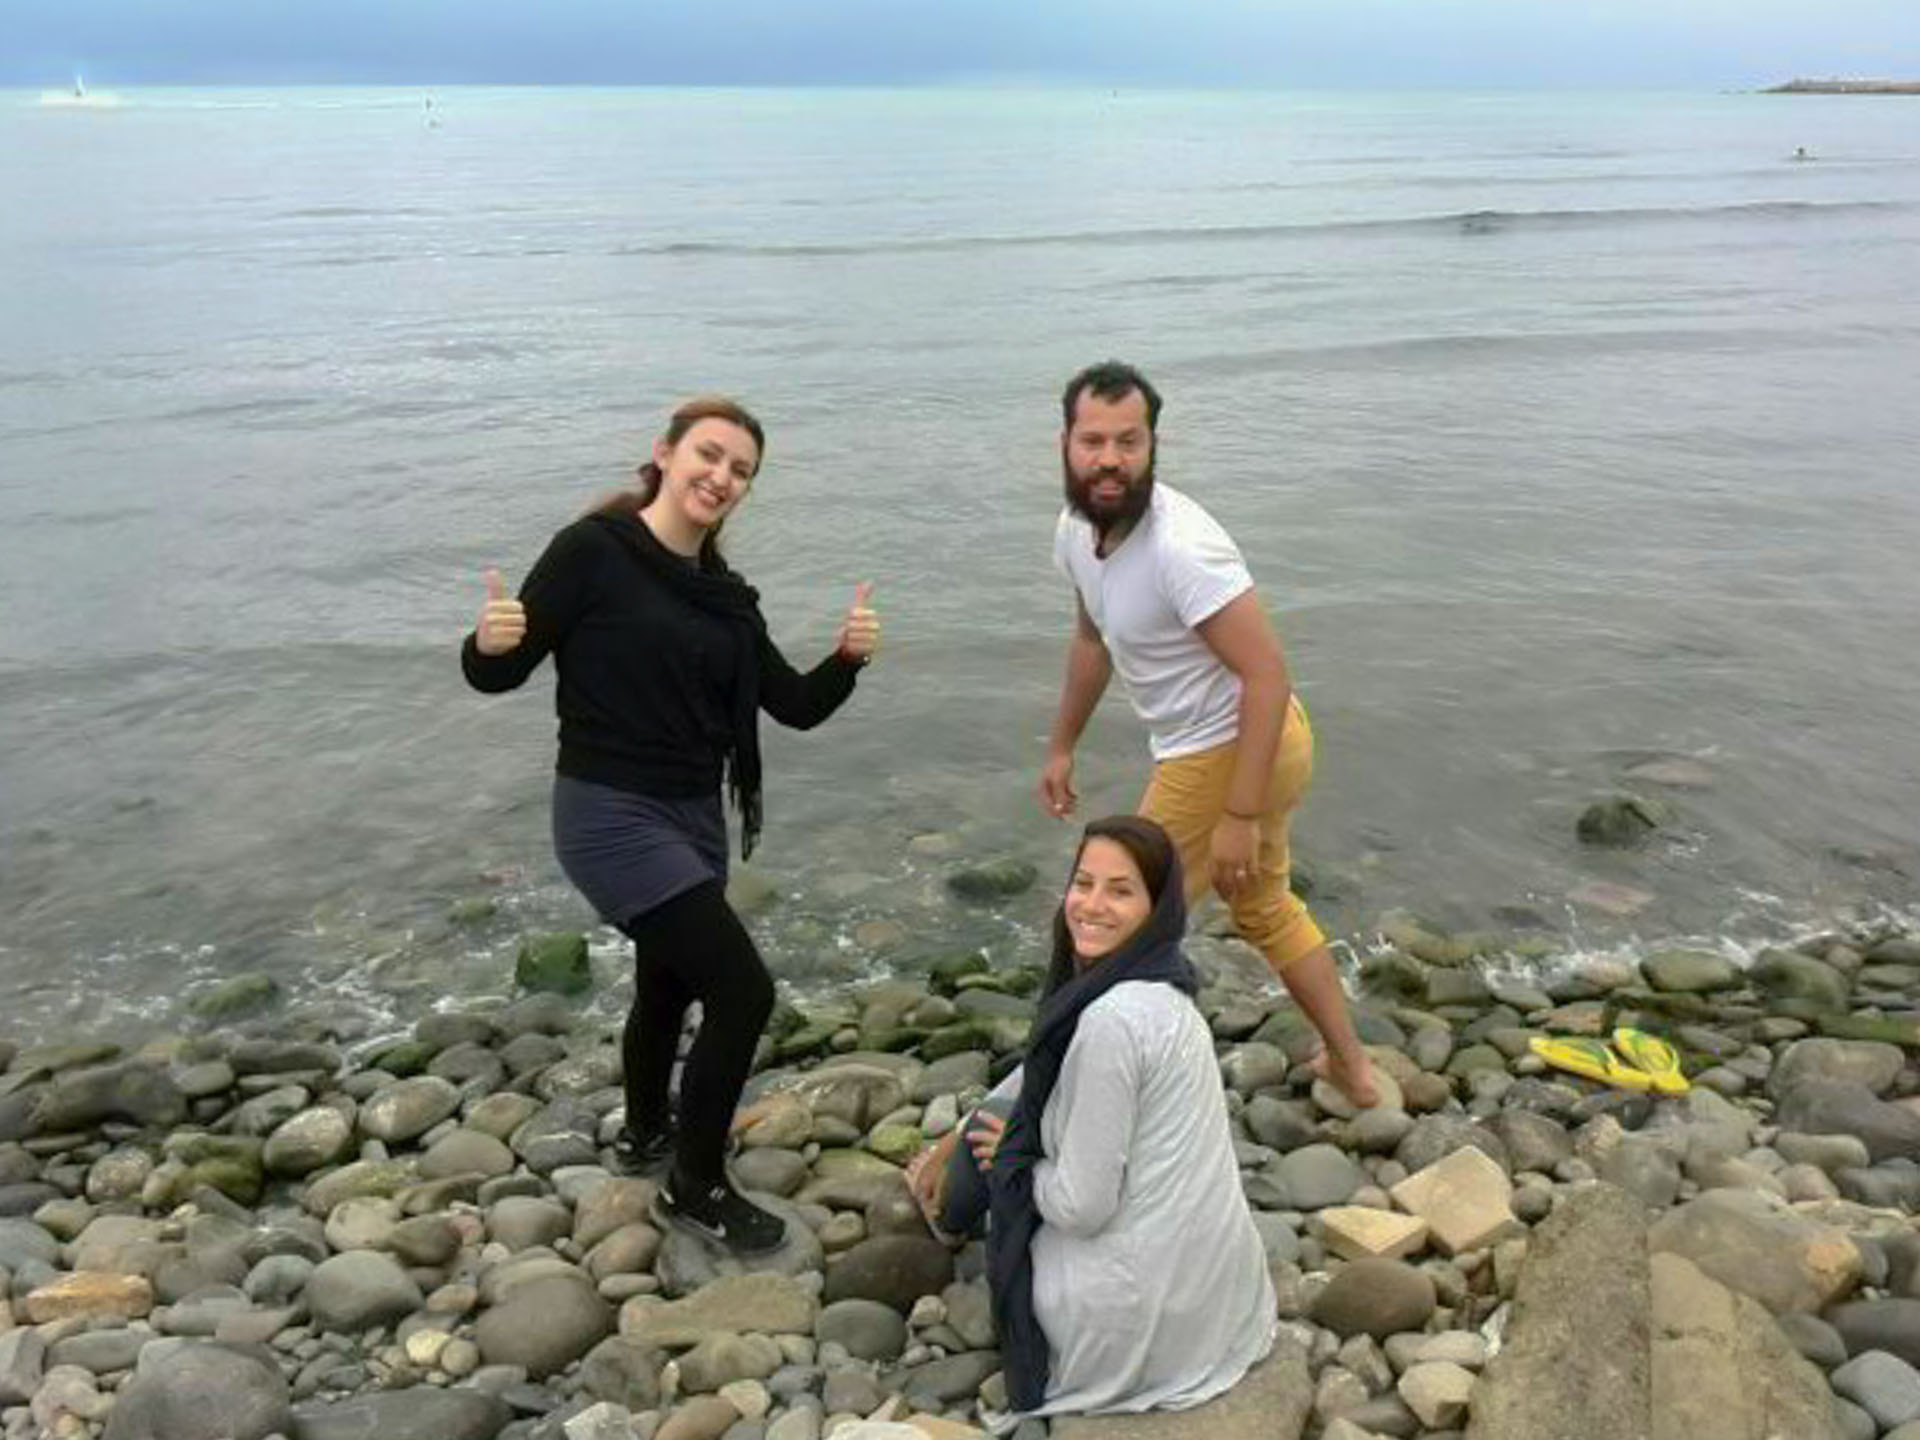 Tiago, Fernanda and our iranian friend at the black sea with rocks